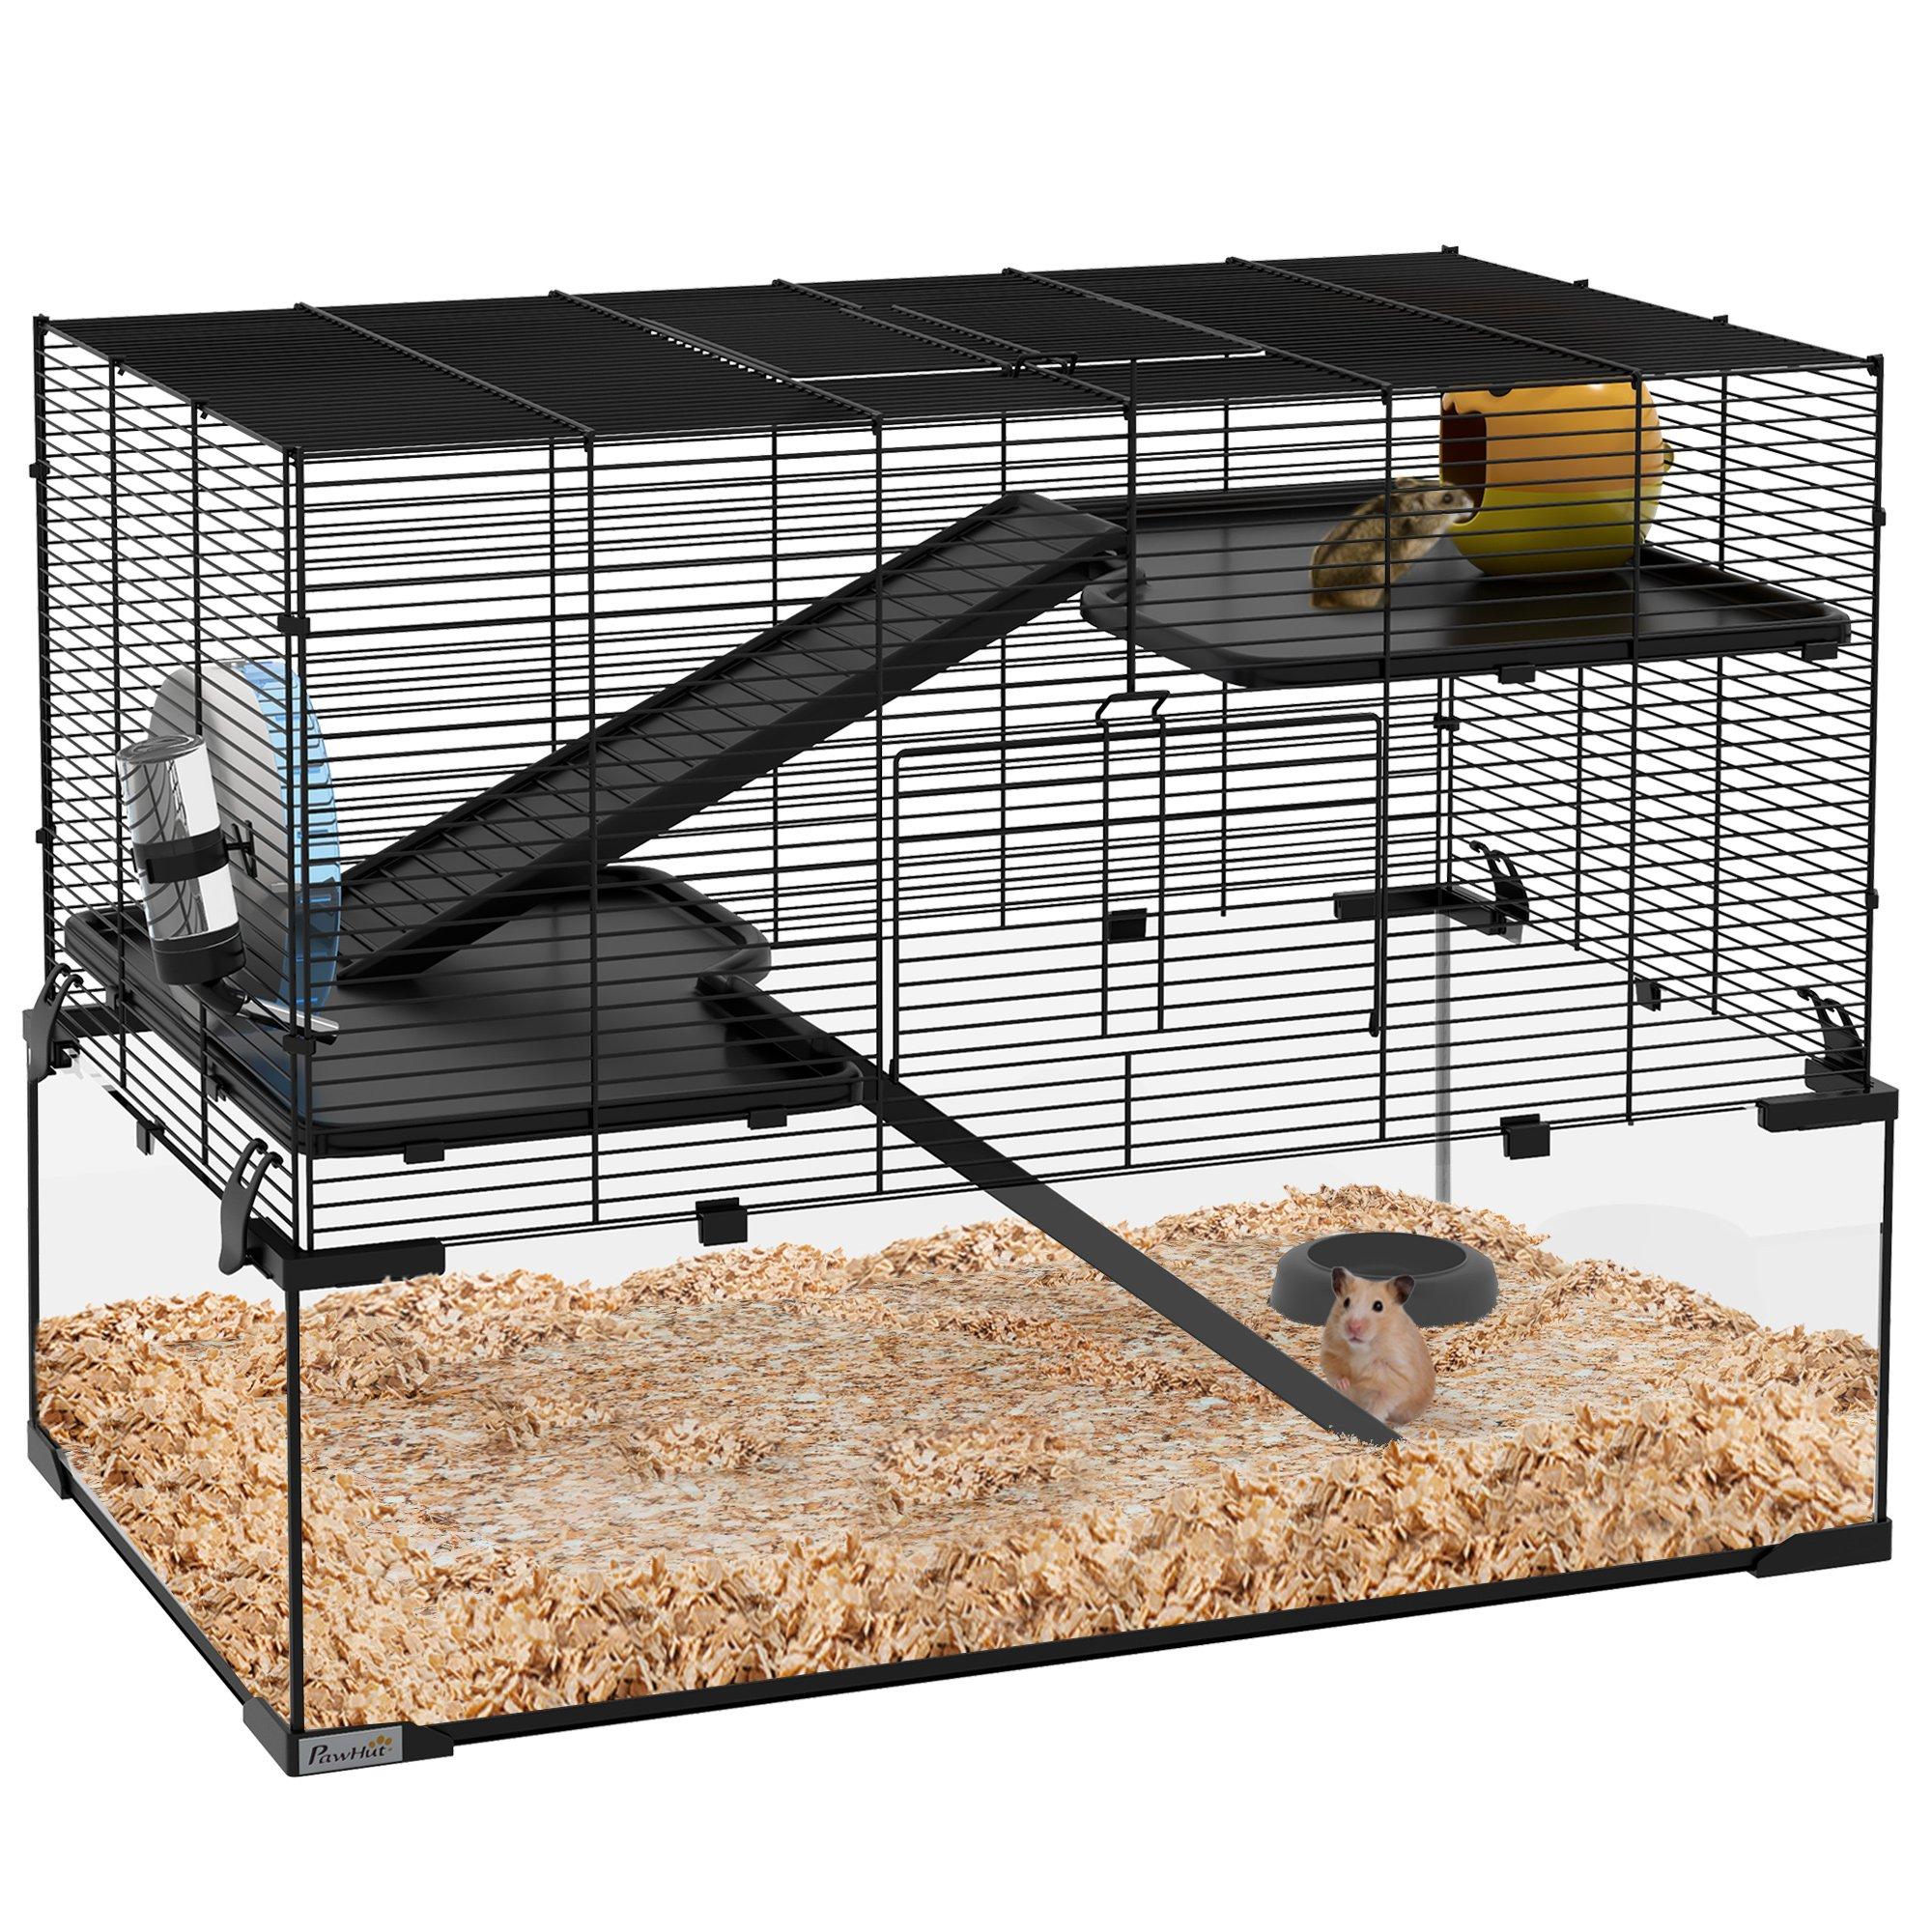 3 Tiers Hamster Cage, Gerbil Cage with Ramps, Exercise Wheel